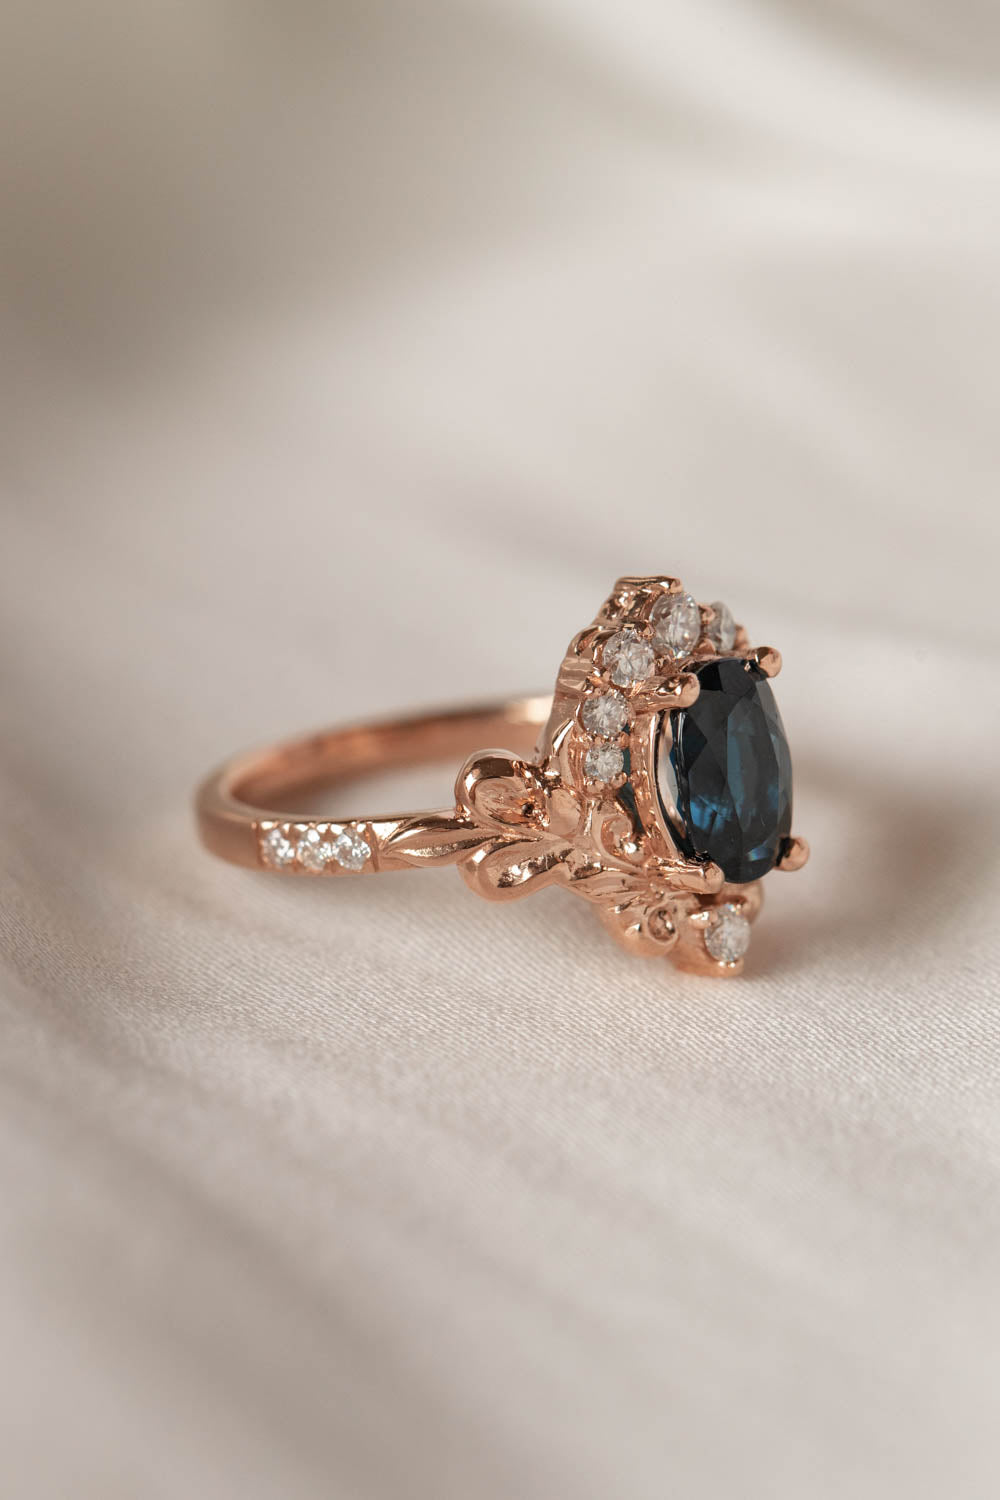 Teal tourmaline and diamonds bridal ring set, baroque inspired engagement ring set / Sophie - Eden Garden Jewelry™